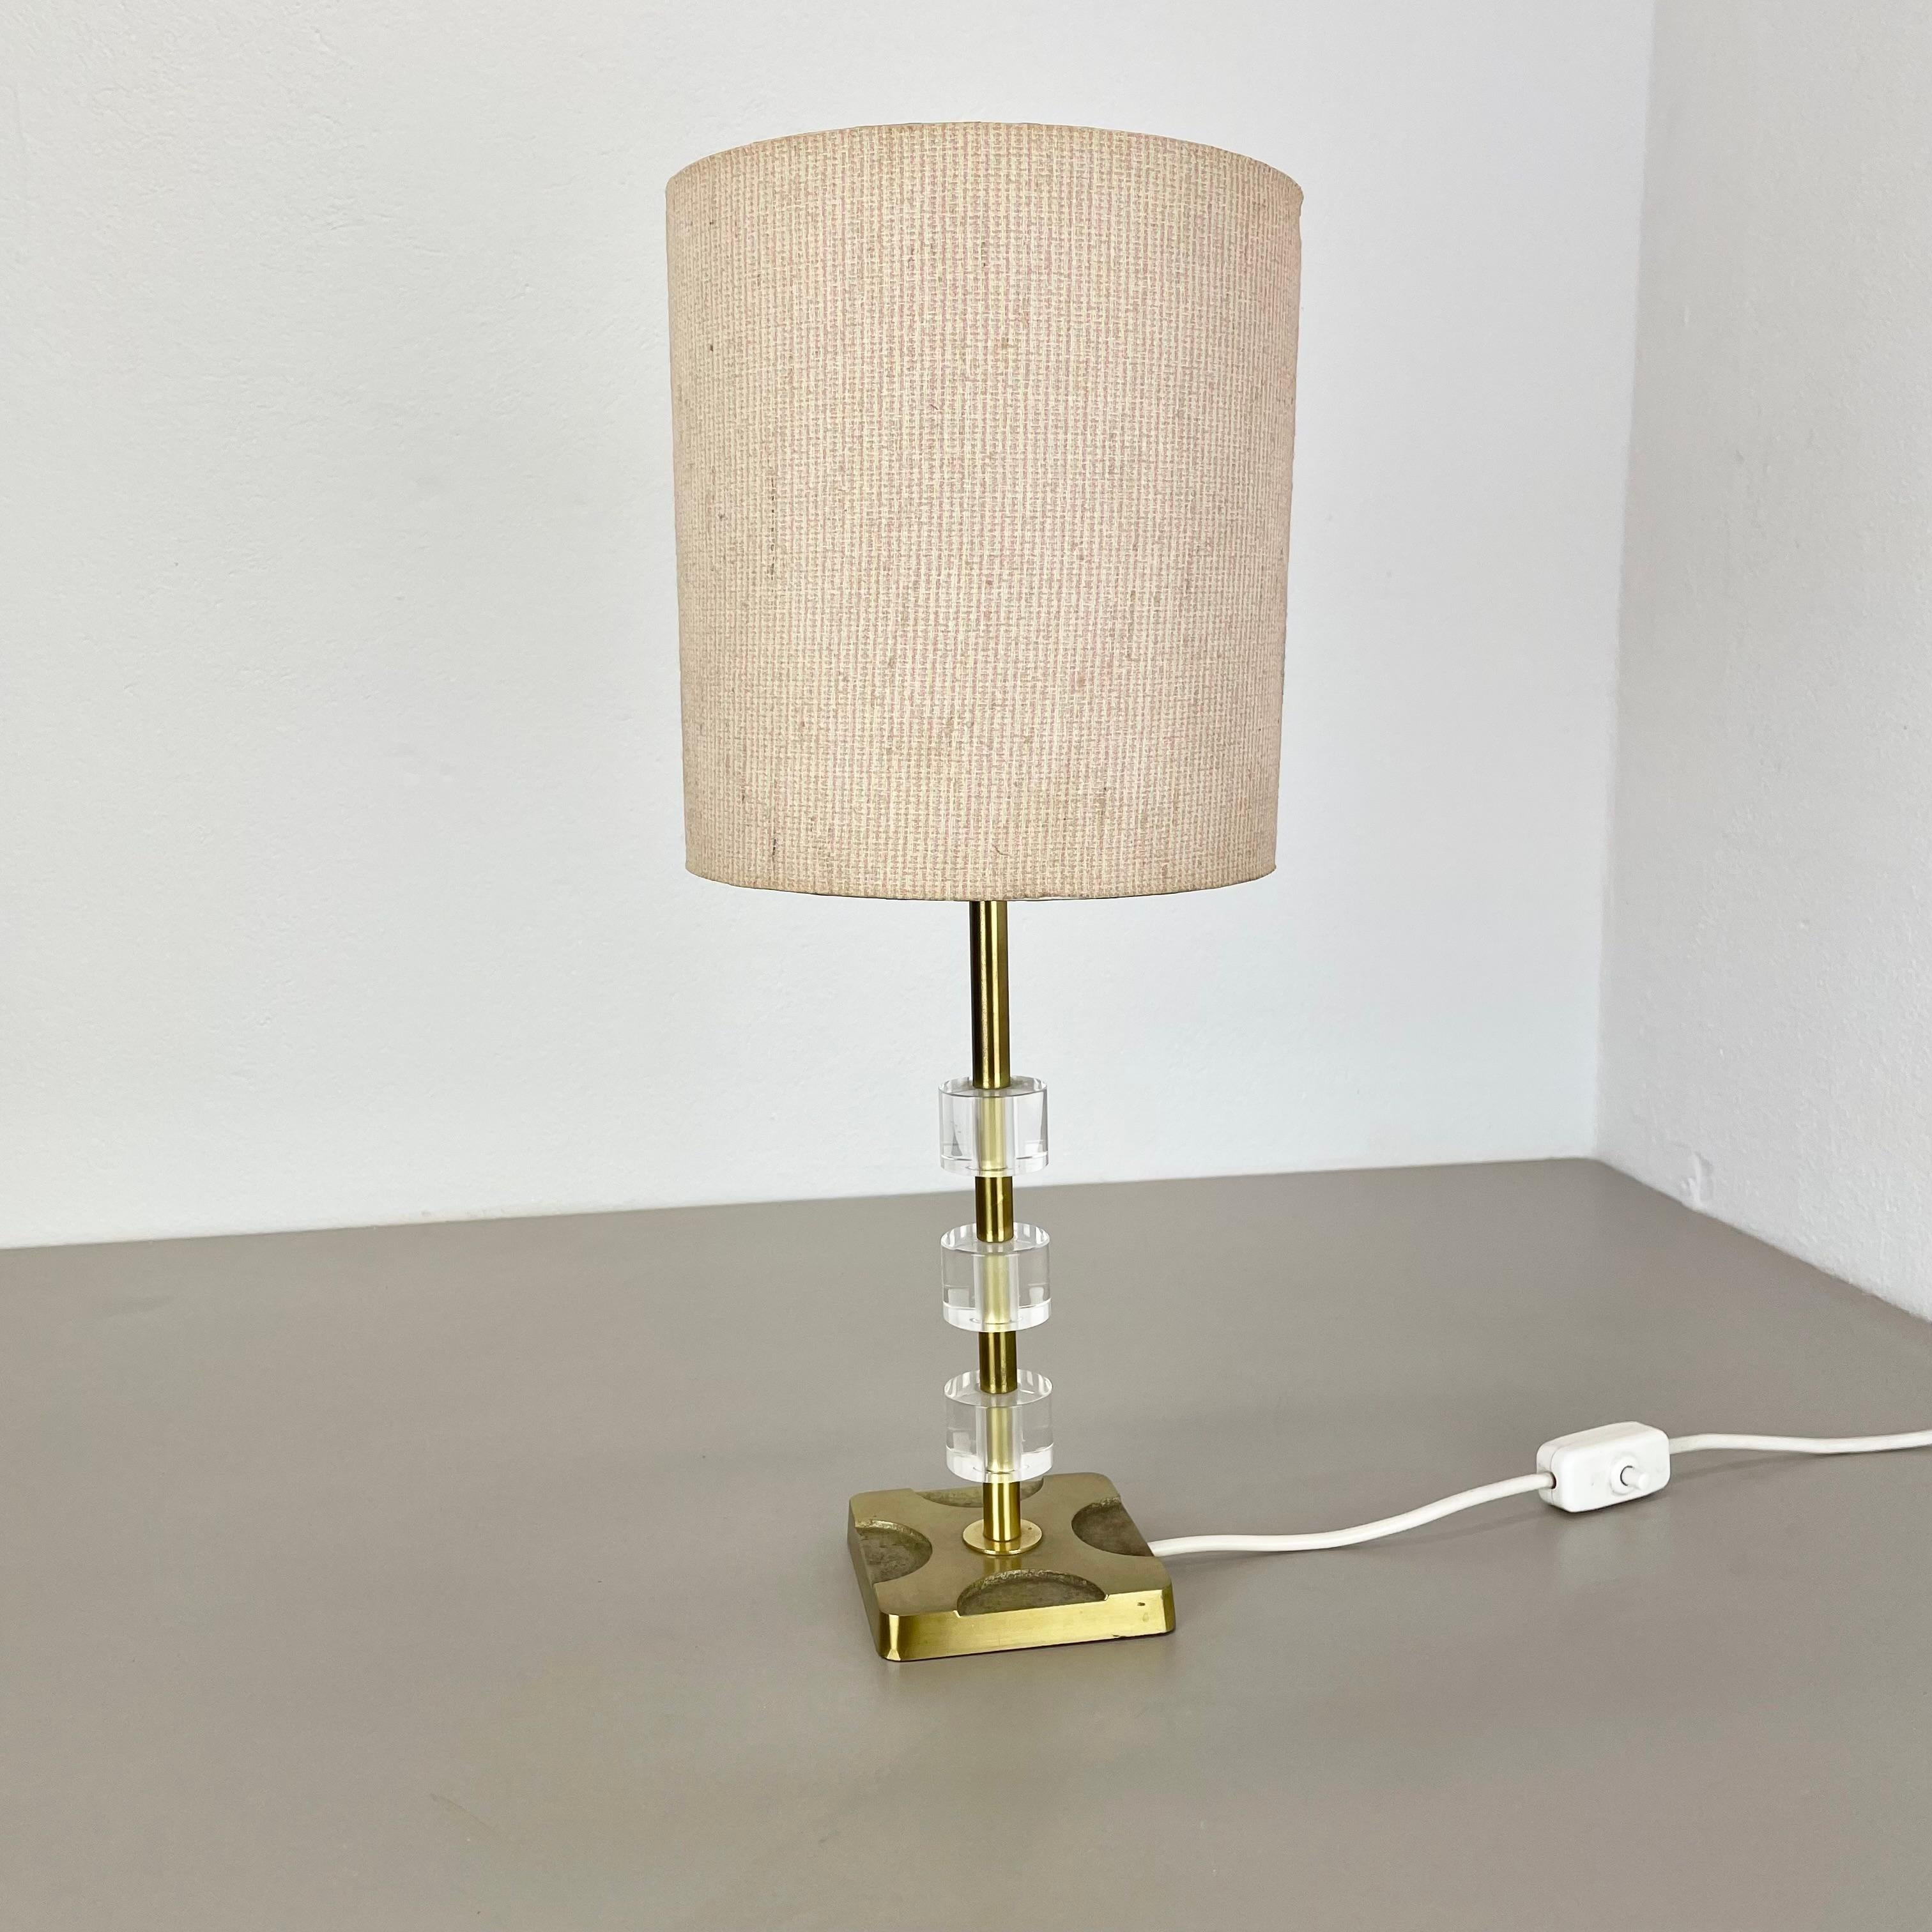 Article:

table light


Origin:

Italy



Age:

1970s



This vintage table light was produced in Italy in the 1970s in Italy. It is made of brass and acryl lucid glass. It features a very unique and unusual Brutalist postmodern cubic form with one